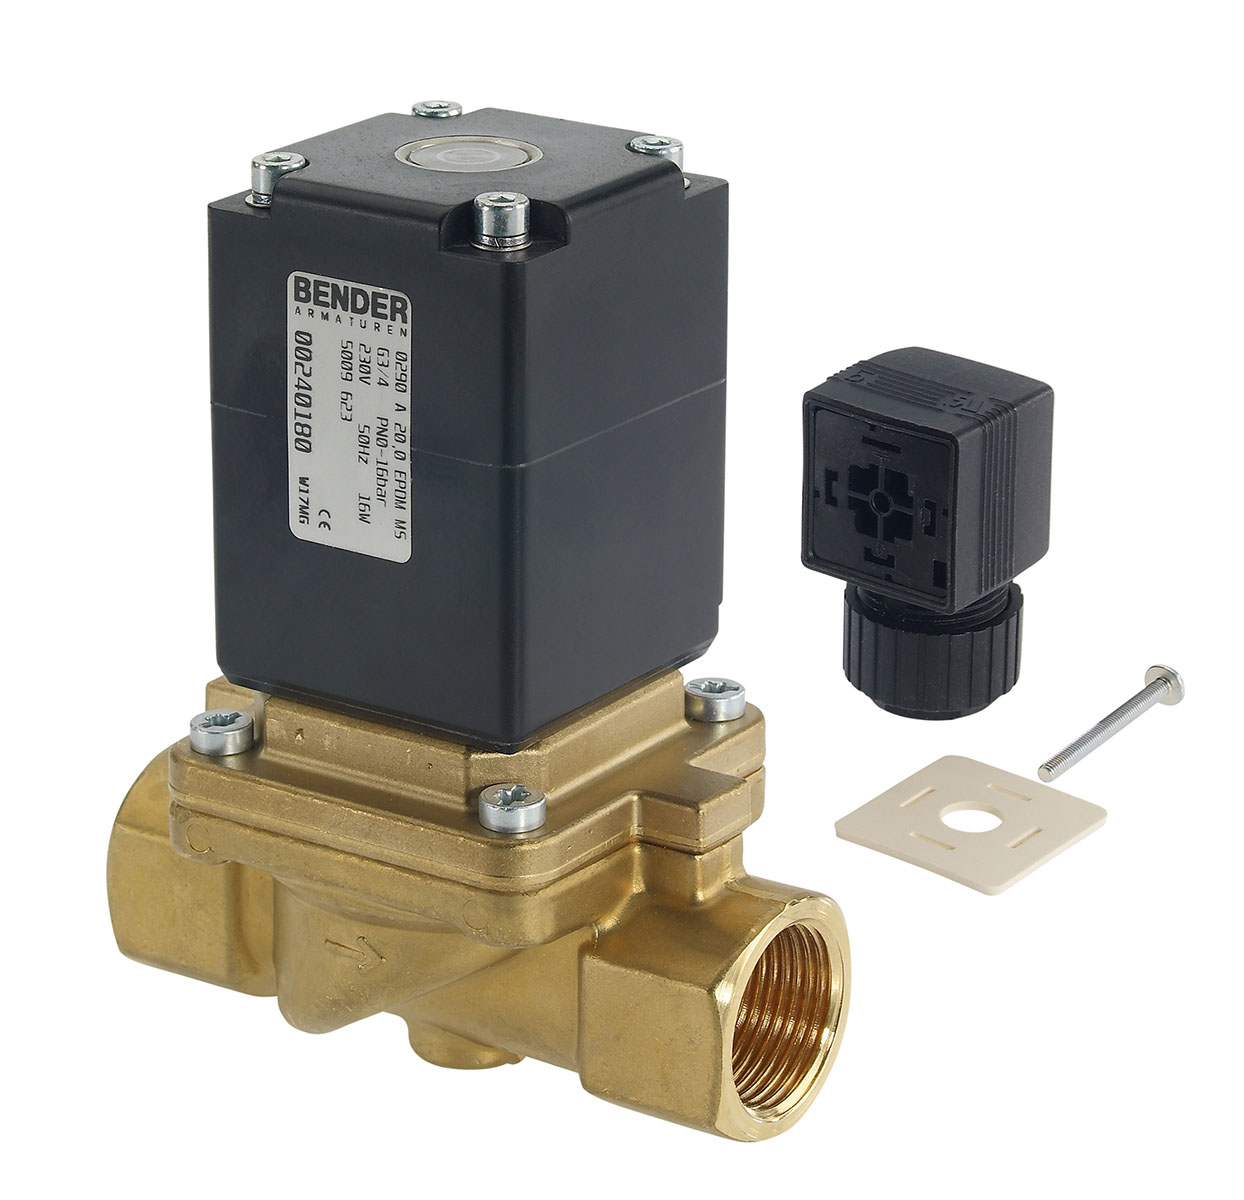 5009604 - 2/2 way solenoid valve normally closed for not flammable gas and fluids Type 6; female thread